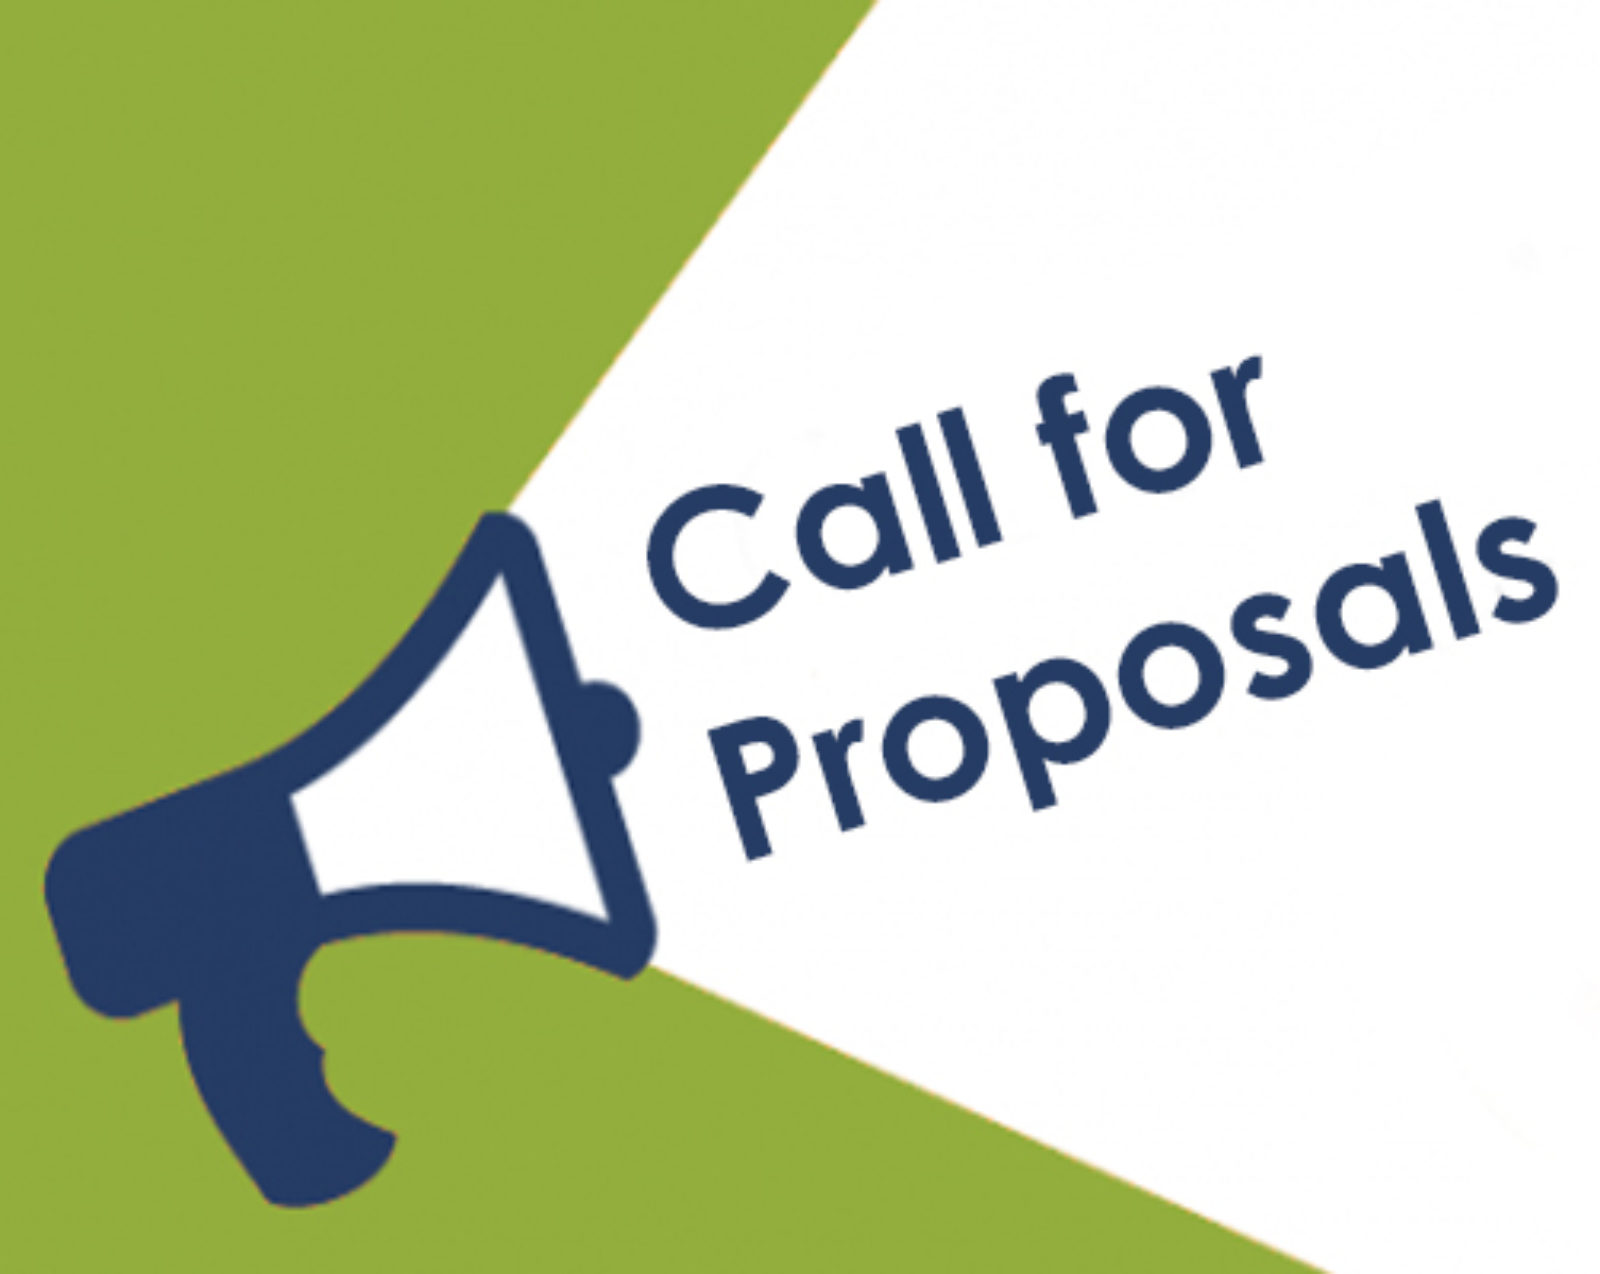 CALL FOR PROPOSAL